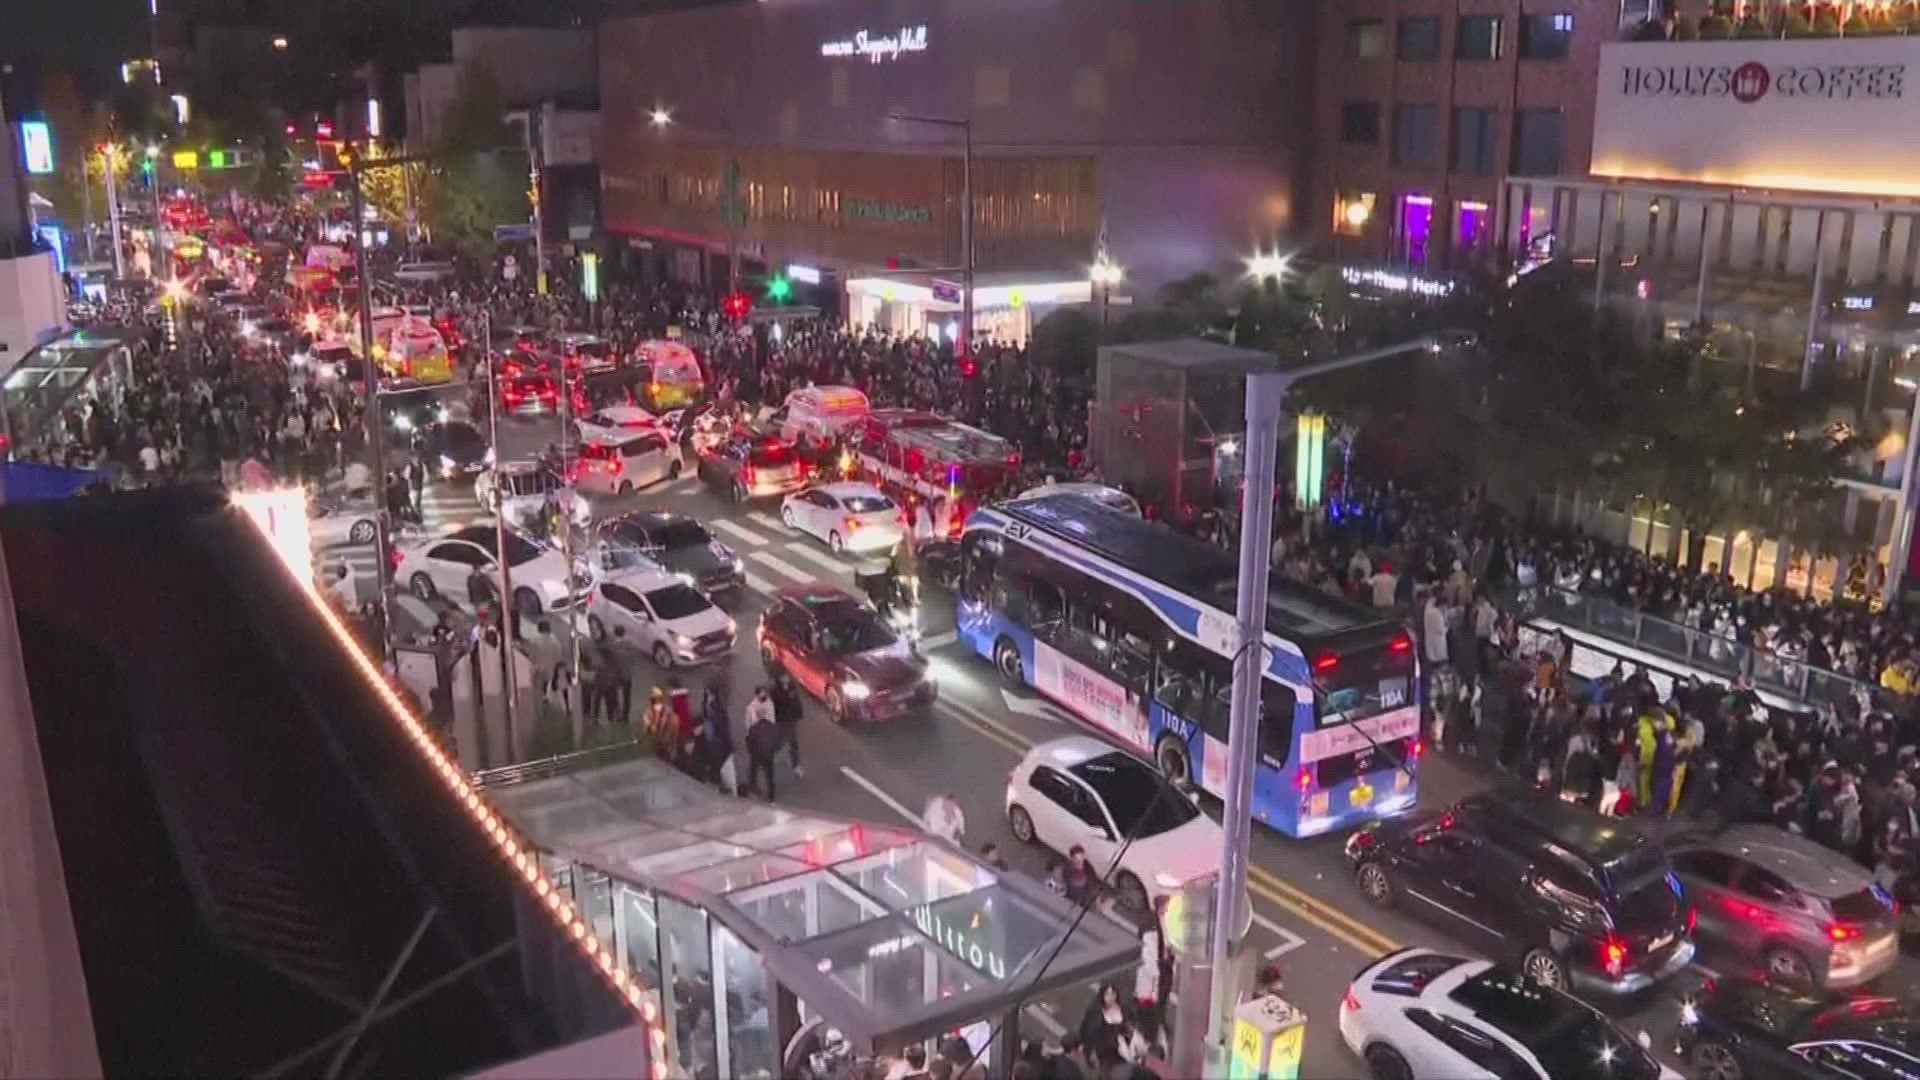 It remains unclear what led to the crowd surge in the nightlife district in Seoul, South Korea.